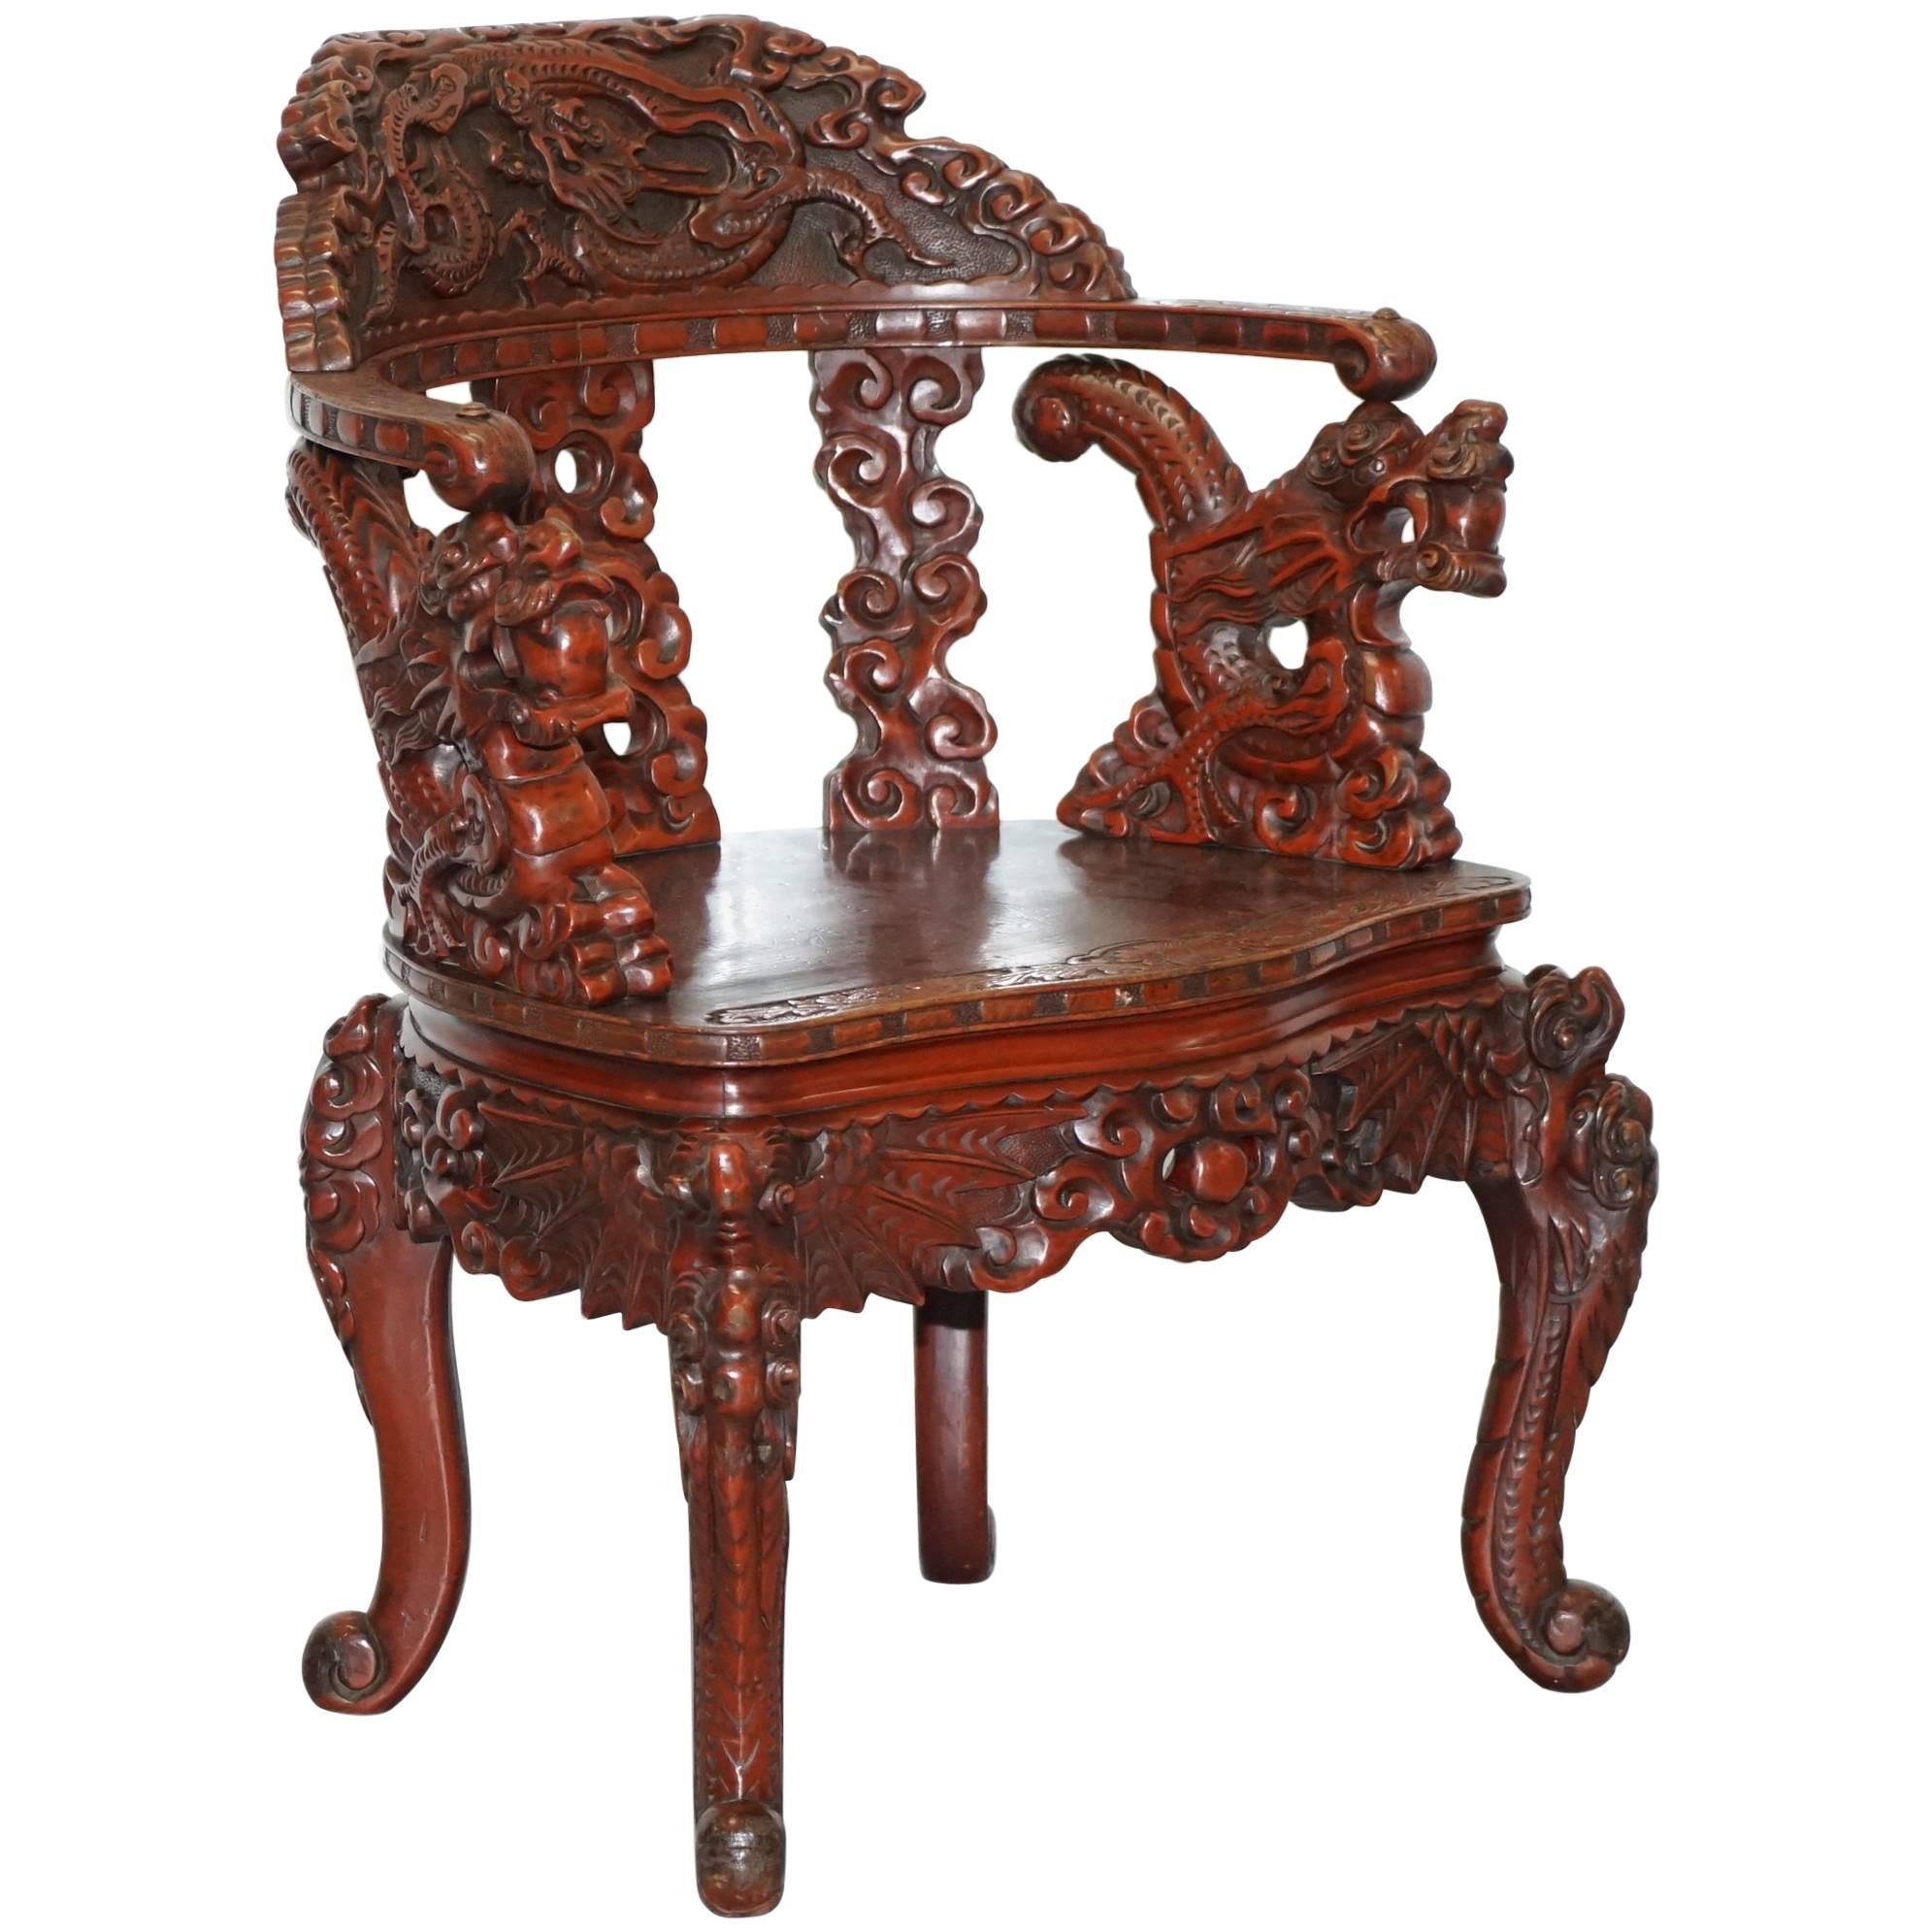 Chinese Qing Dynasty Carved Redwood Dragon and Lion Foo Dogs Armchair circa 1870